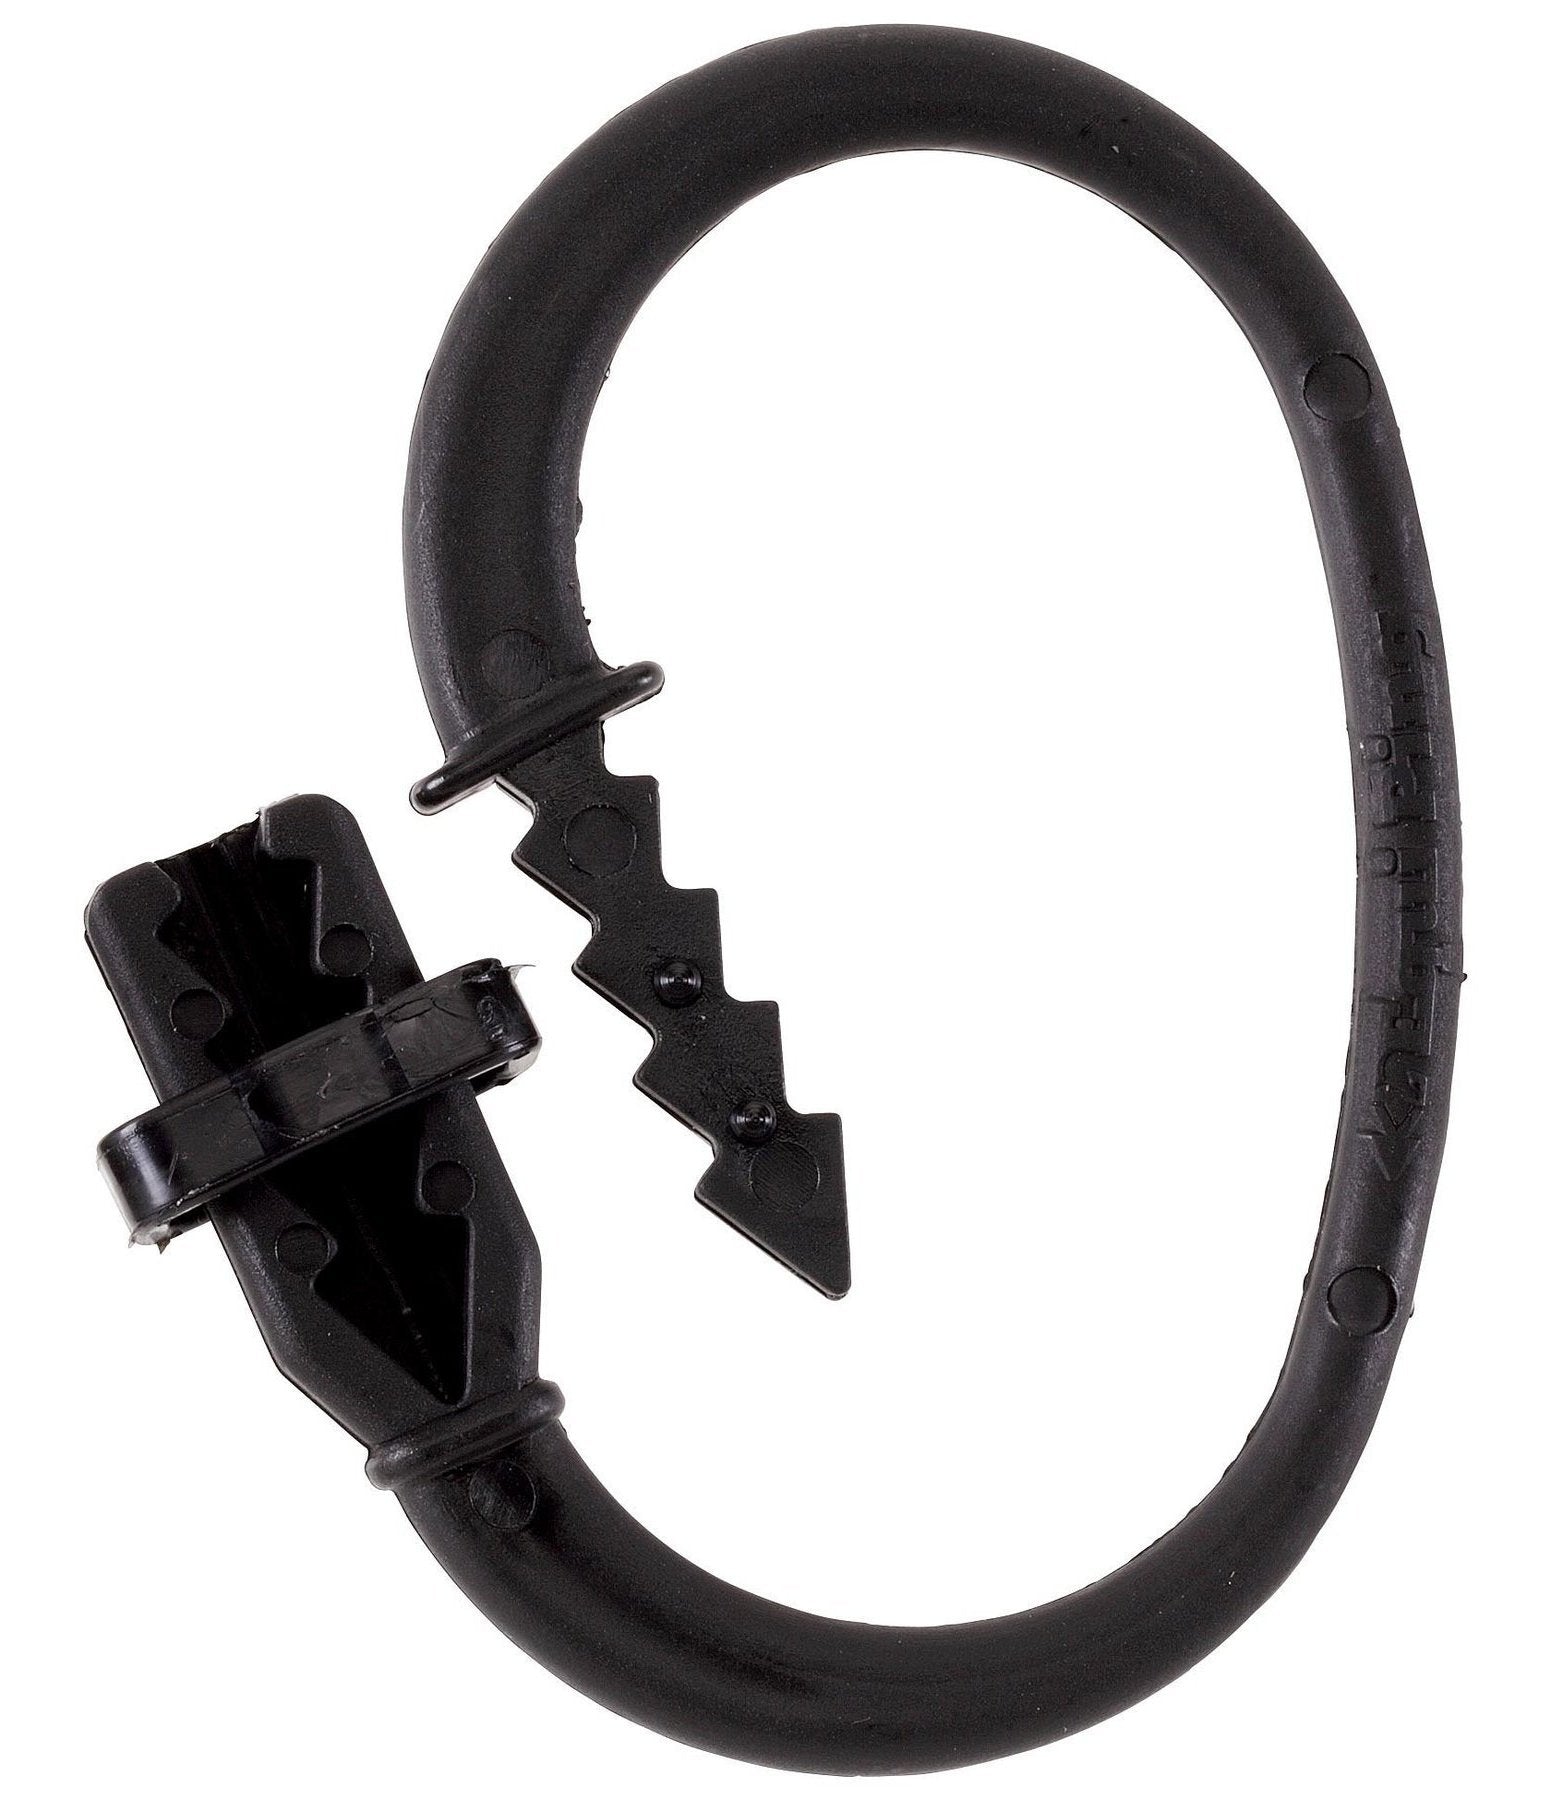 Equi-Ping Safety Release For Tying Up Horses - Black 